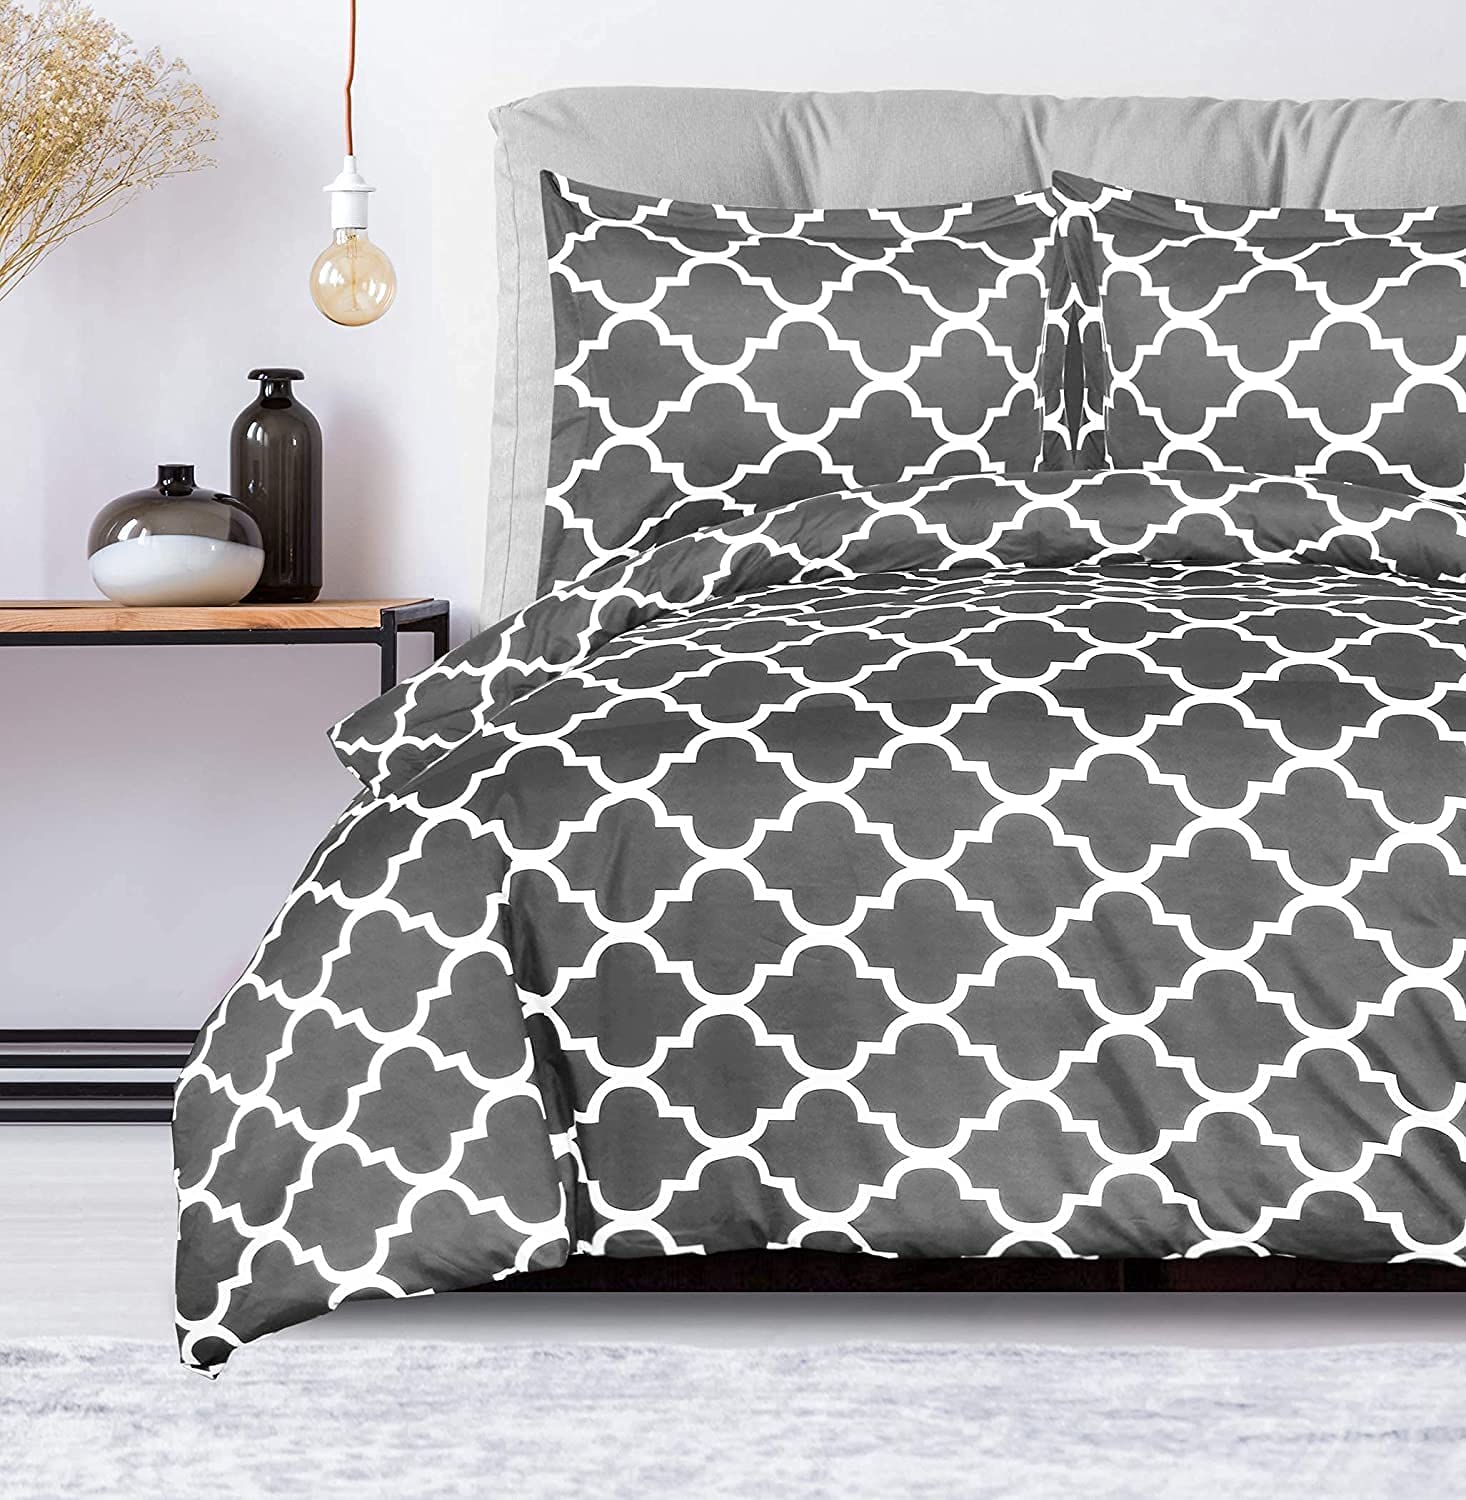 Utopia Bedding Duvet Cover Full Size Set - 1 Duvet Cover with 2 Pillow  Shams - 3 Pieces Comforter Co…See more Utopia Bedding Duvet Cover Full Size  Set